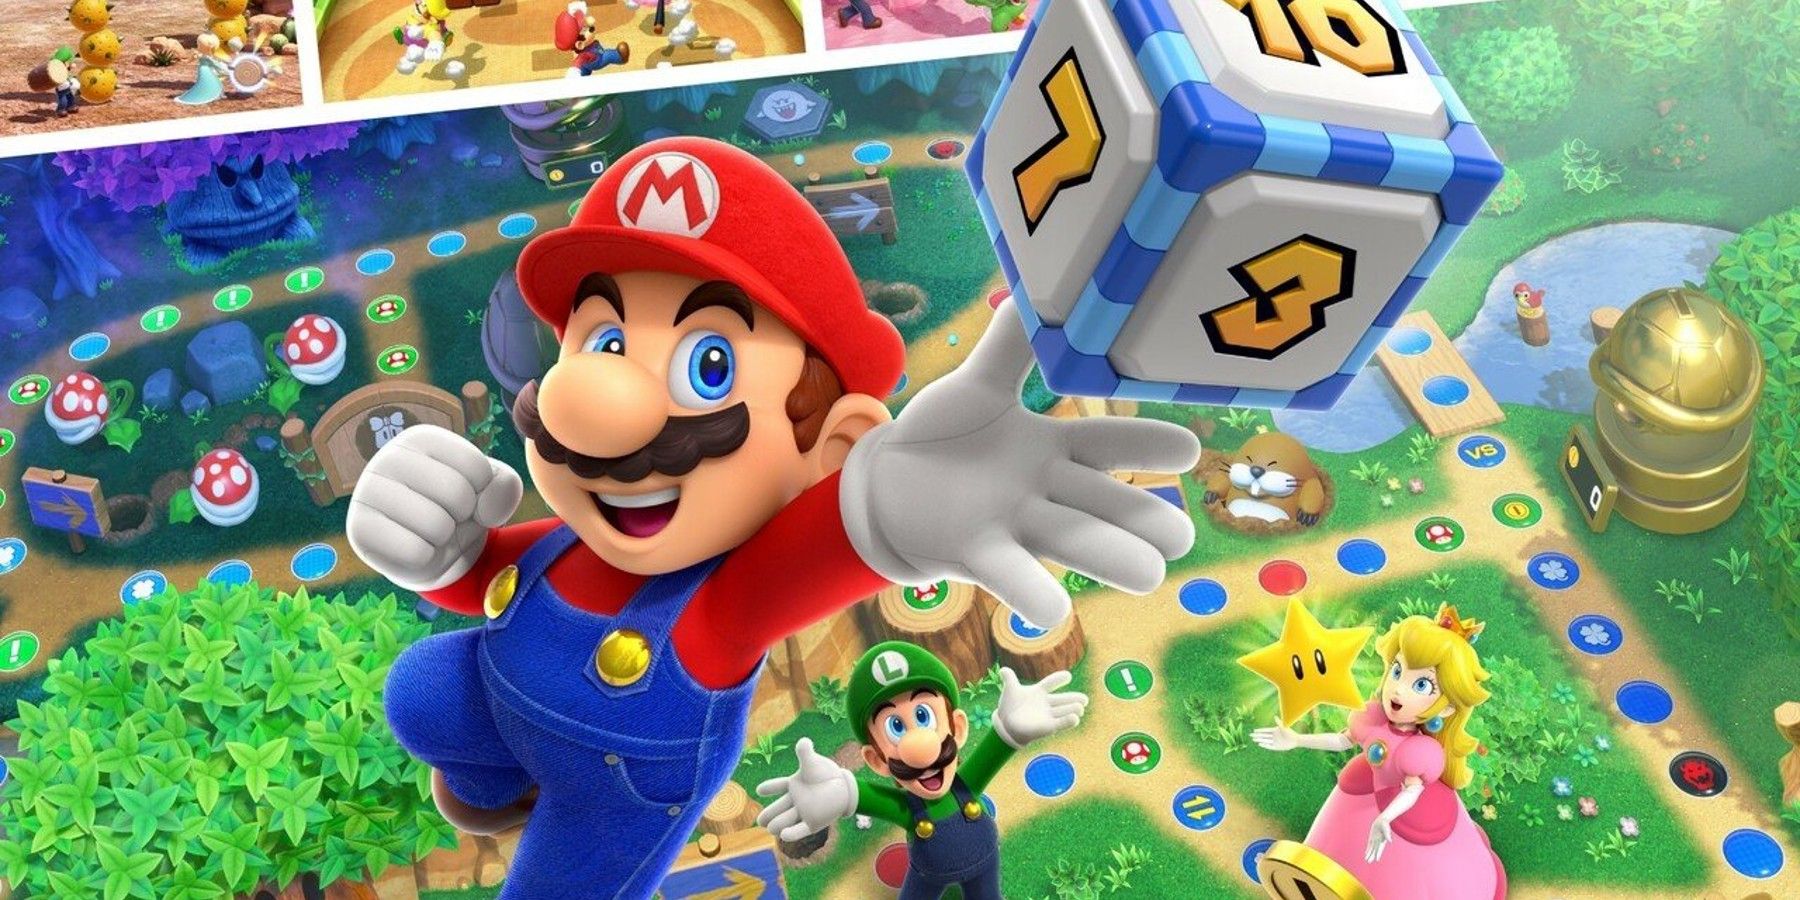 Mario Party Superstars Overview Trailer Explains the Features, Game Modes, and More